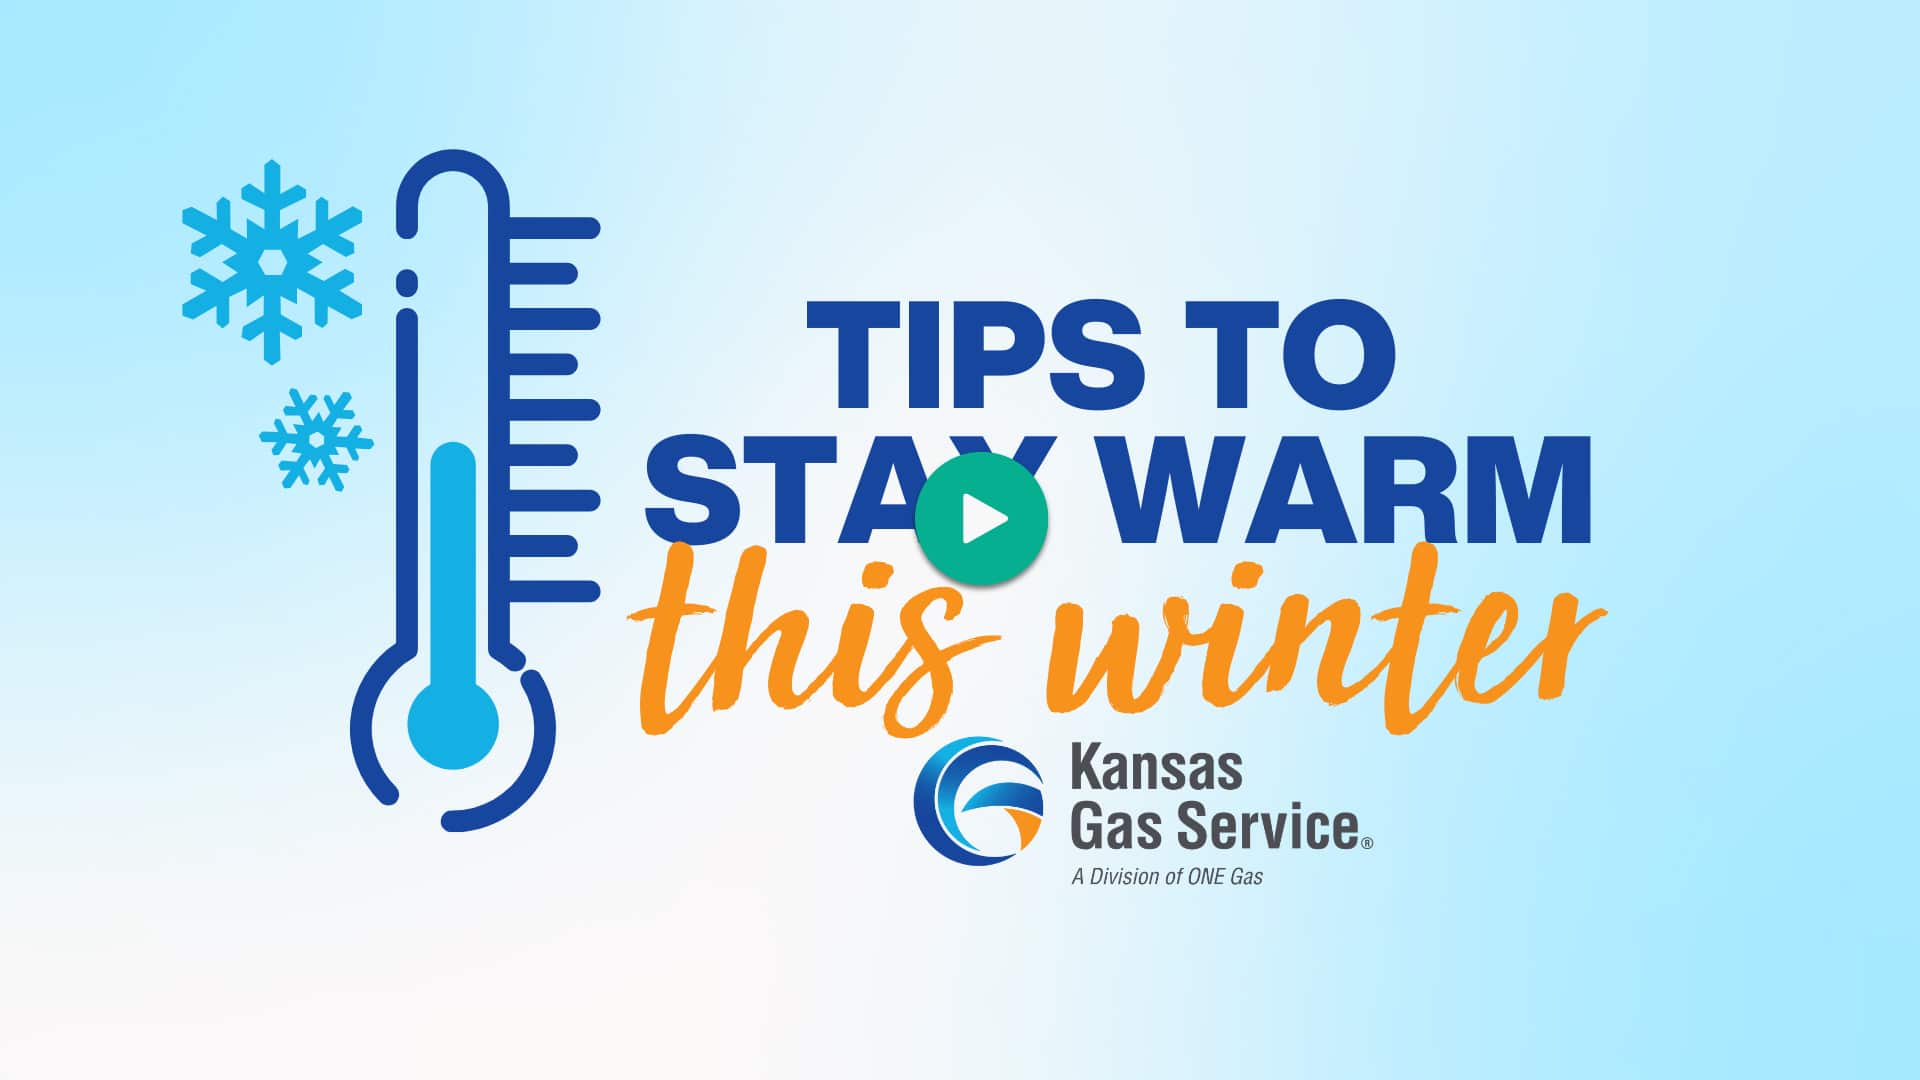 Winter Tips Video Play Image